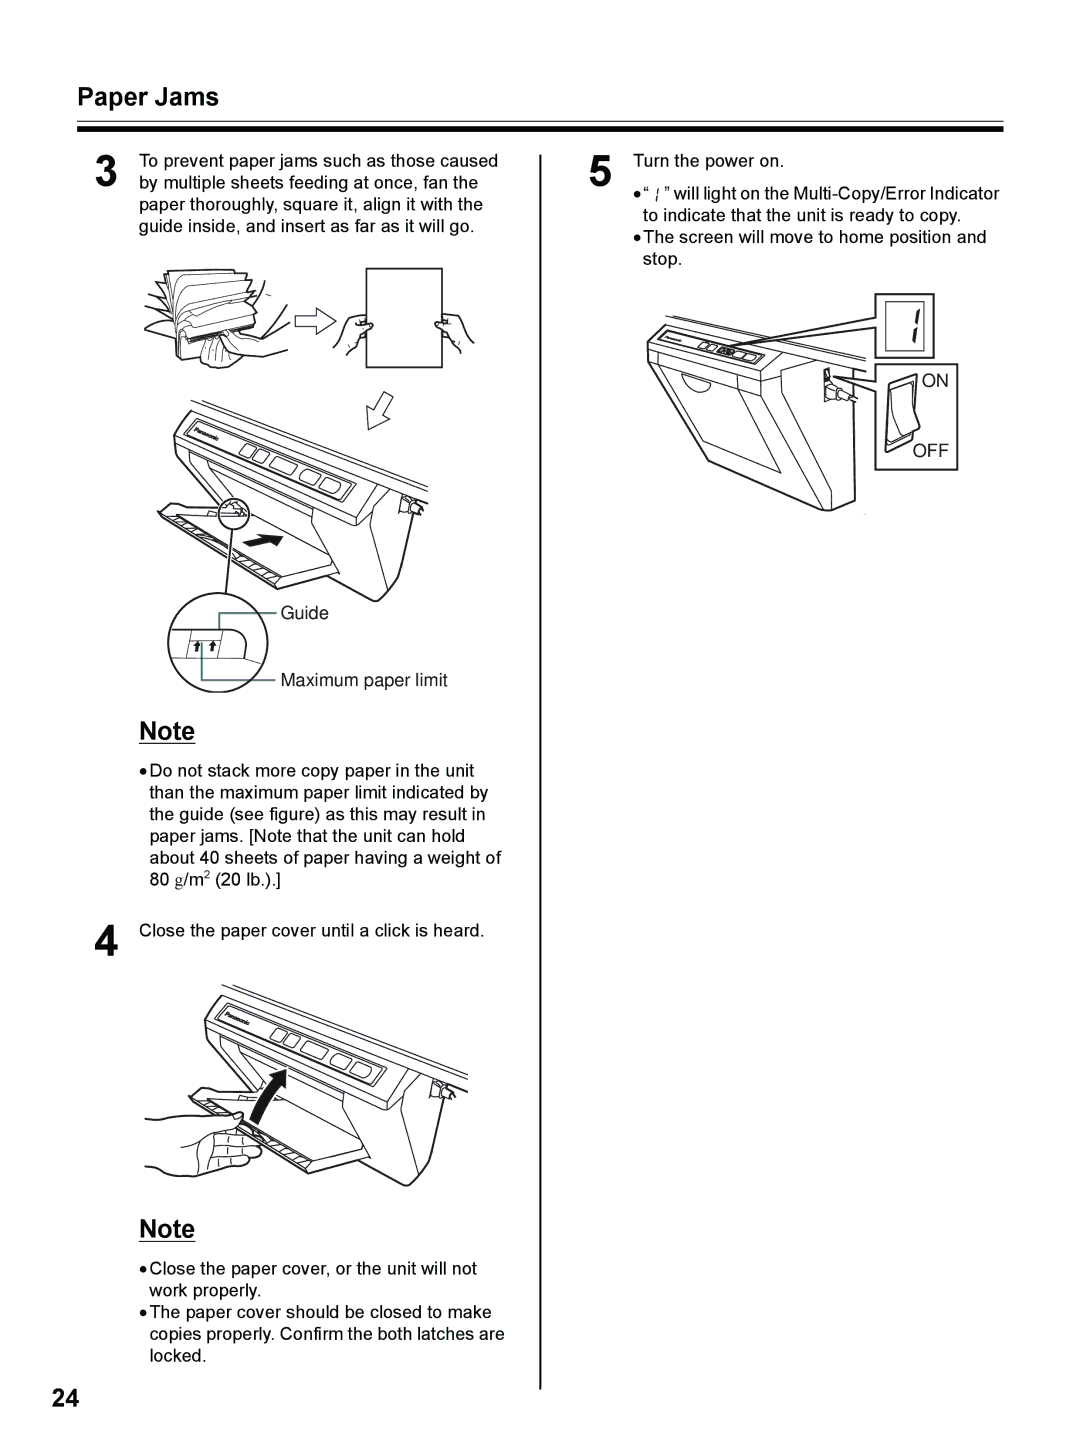 Panasonic UB-8325 operating instructions To prevent paper jams such as those caused 